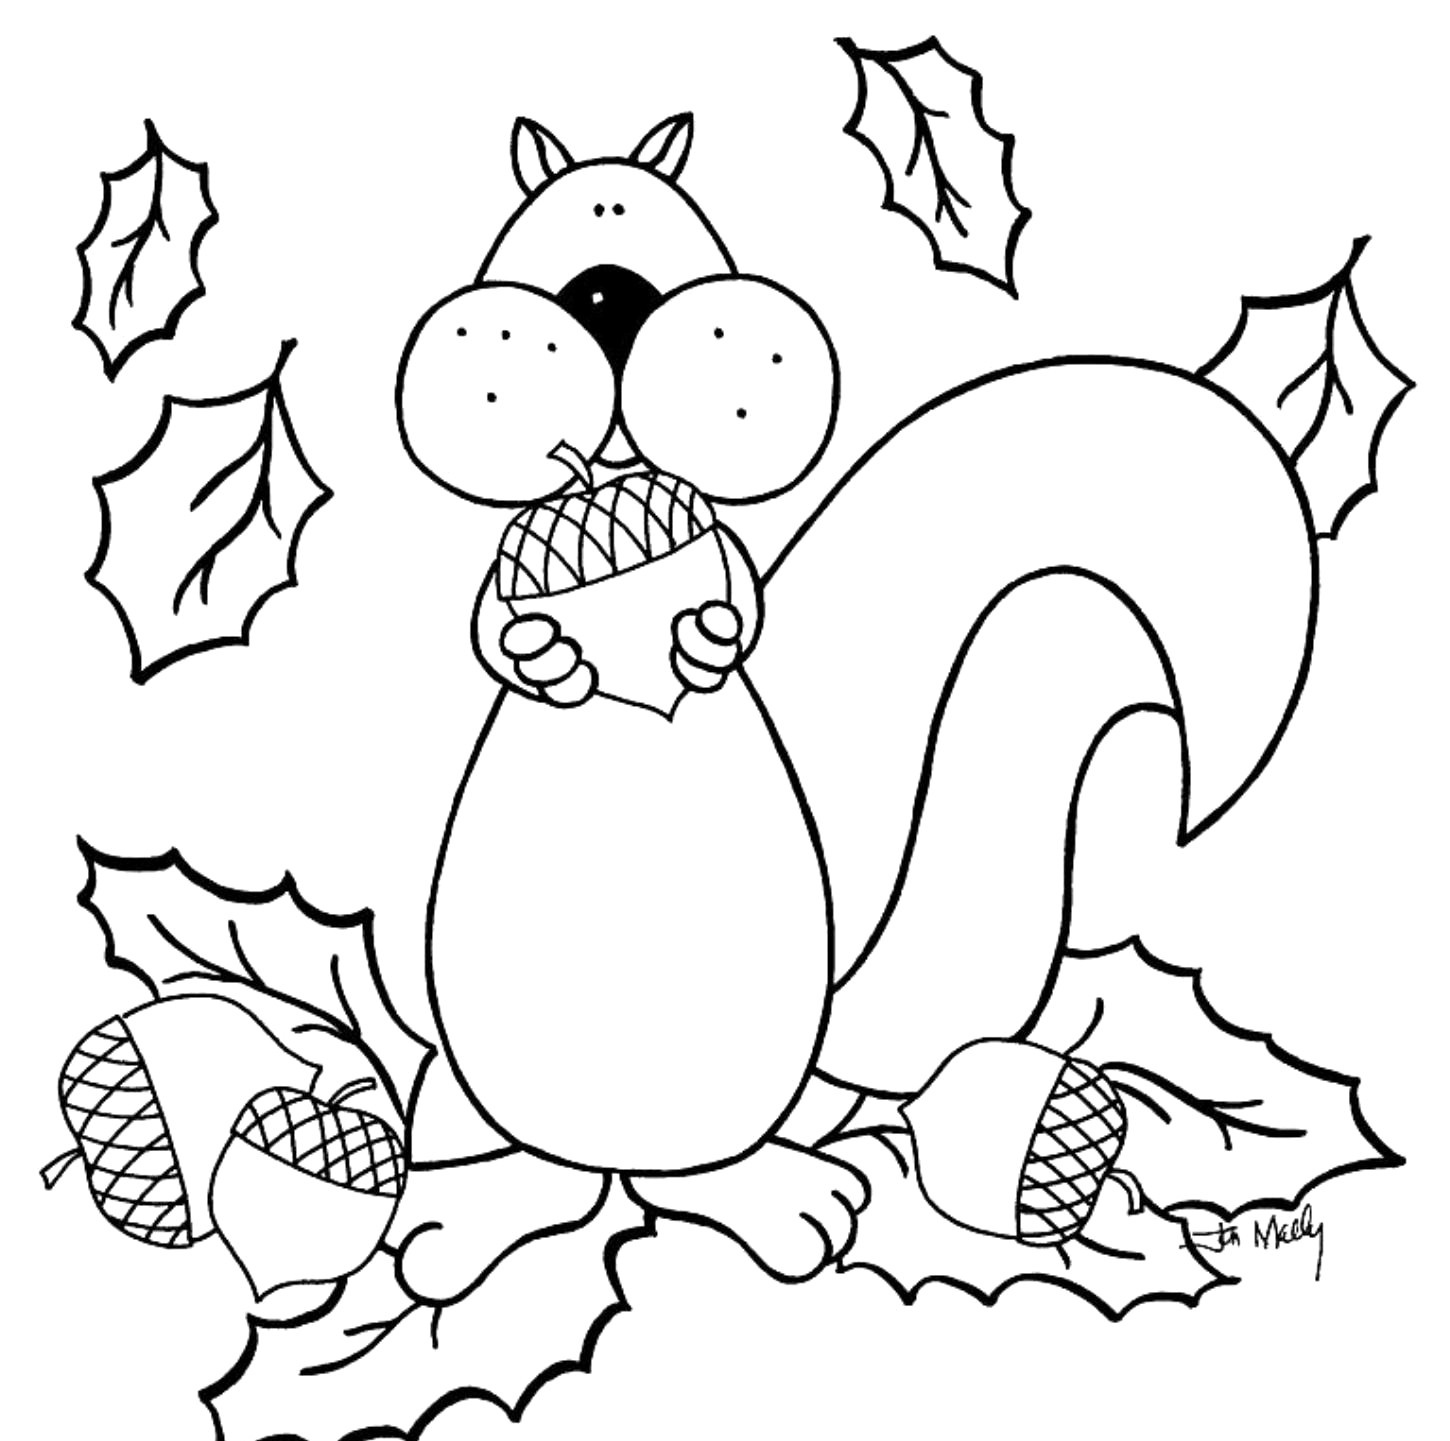 harvest-coloring-pages-best-coloring-pages-for-kids-free-printable